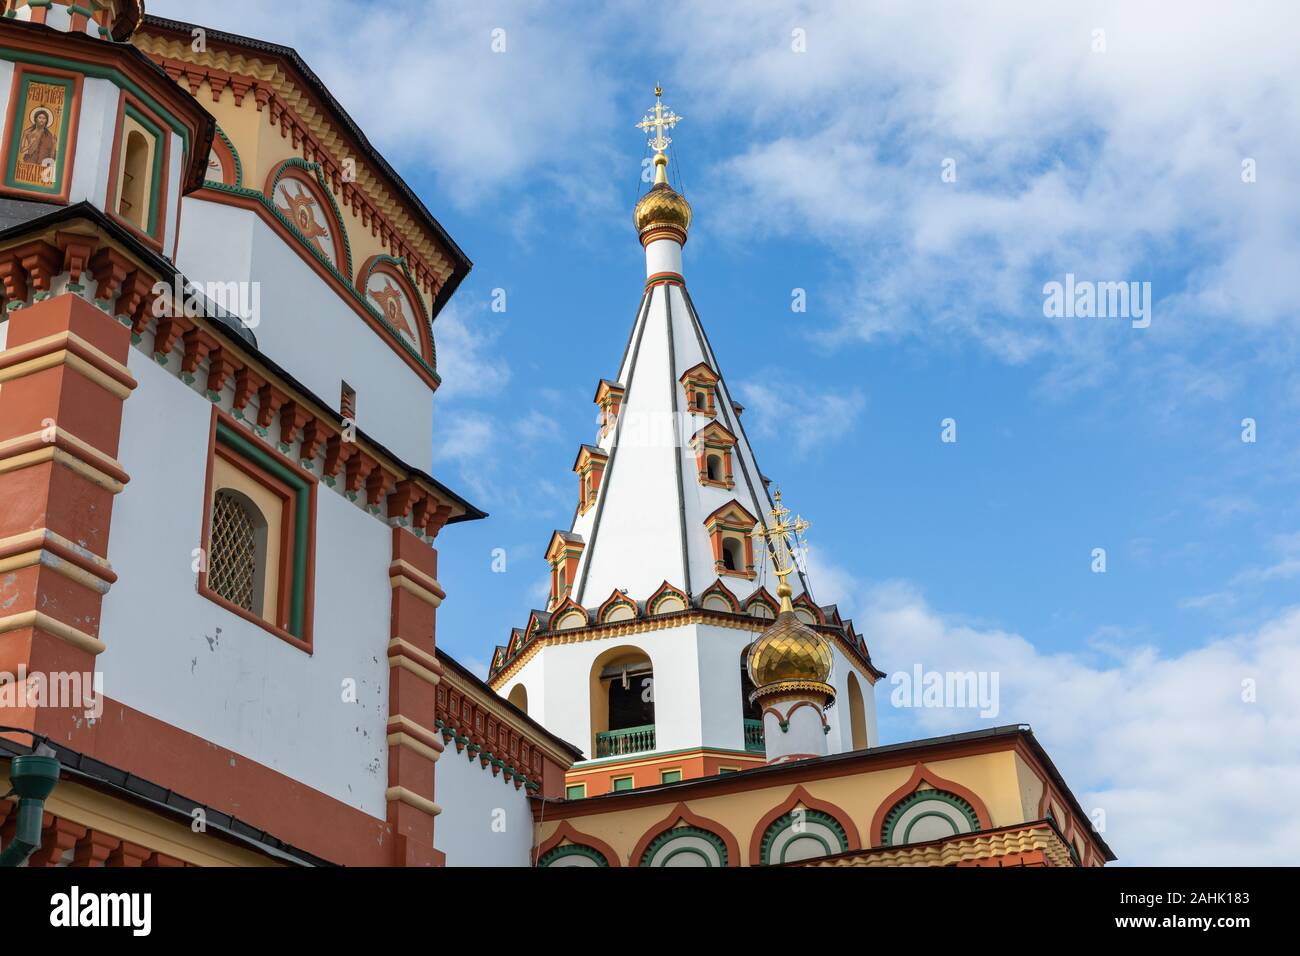 The Cathedral of the Epiphany of the Lord. Orthodox Church, Catholic Church. Irkutsk, Siberia, Russia. Stock Photo